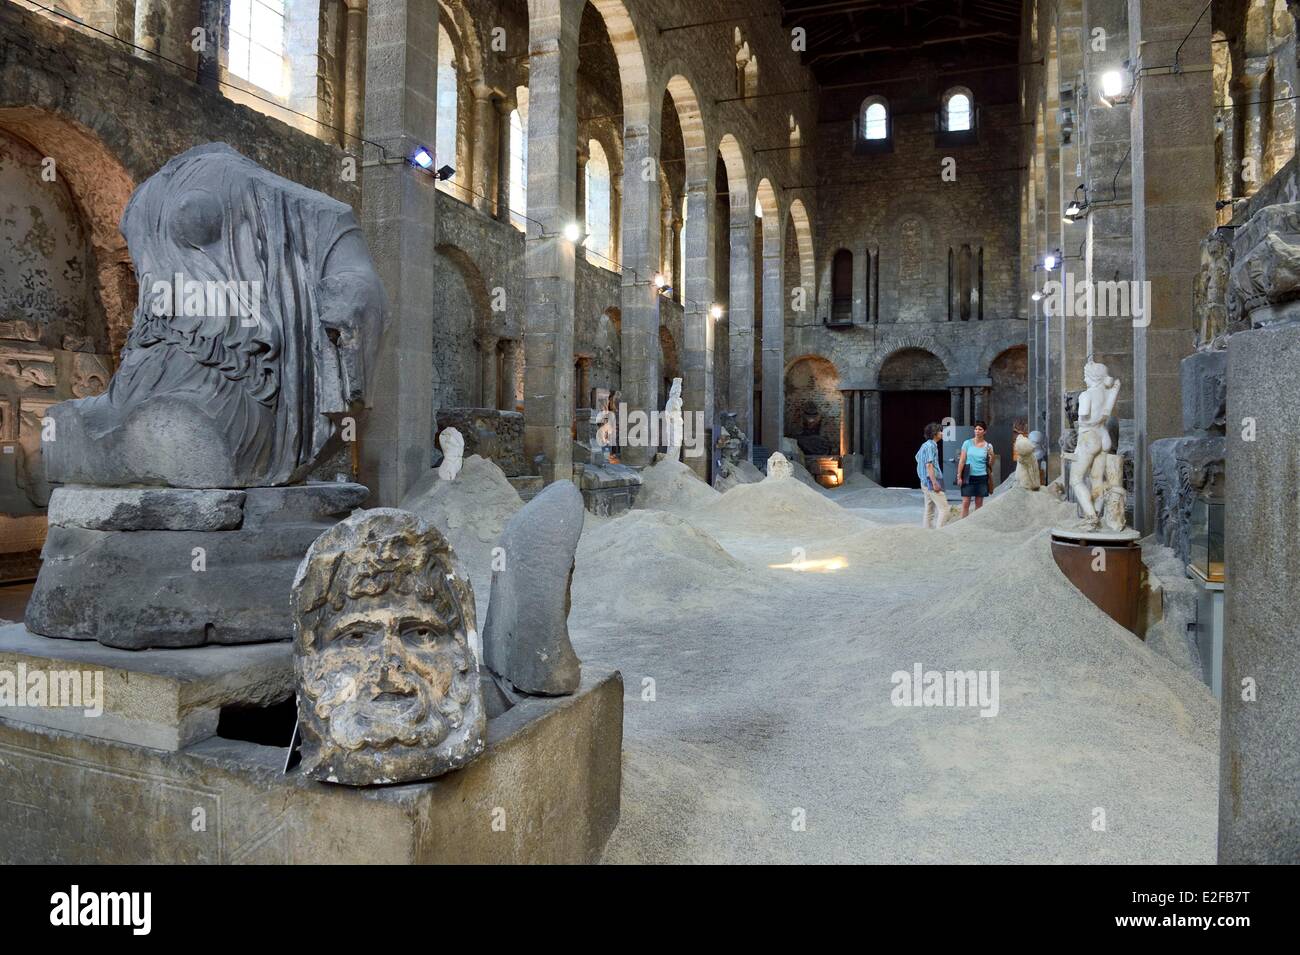 France Isere Vienne Lapidary Museum in Saint Pierre church artist Victoria Klotz installation in the middle of antique pieces Stock Photo